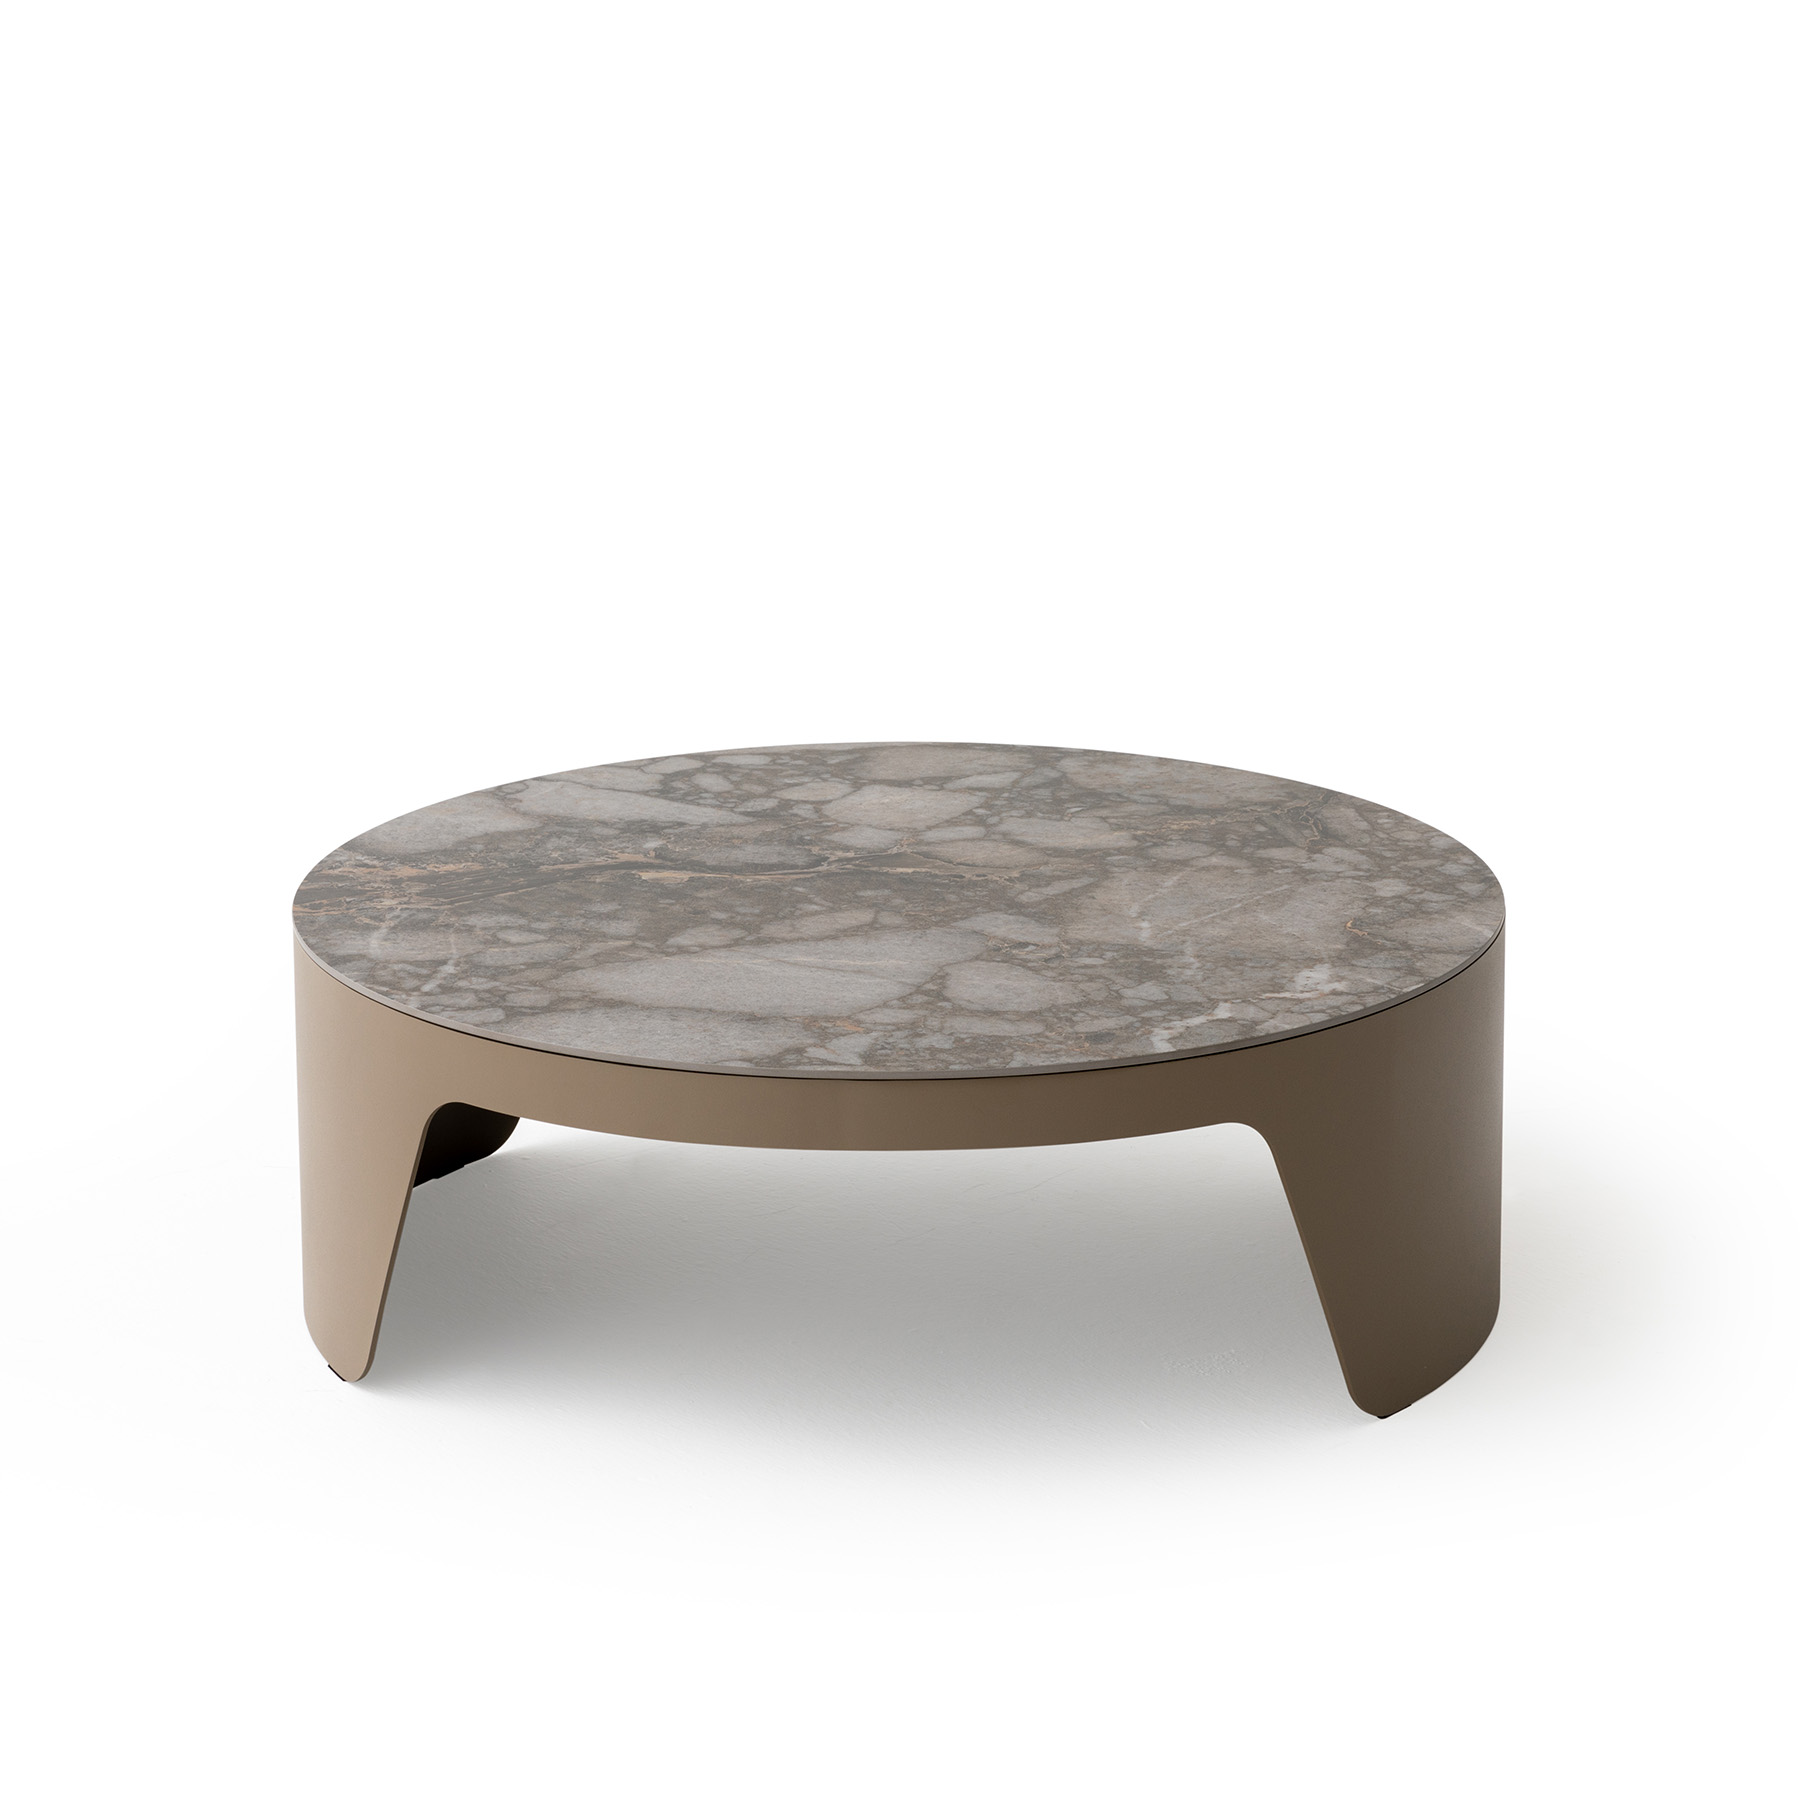 element round coffee table front view gray ceramic metal leg contemporary design